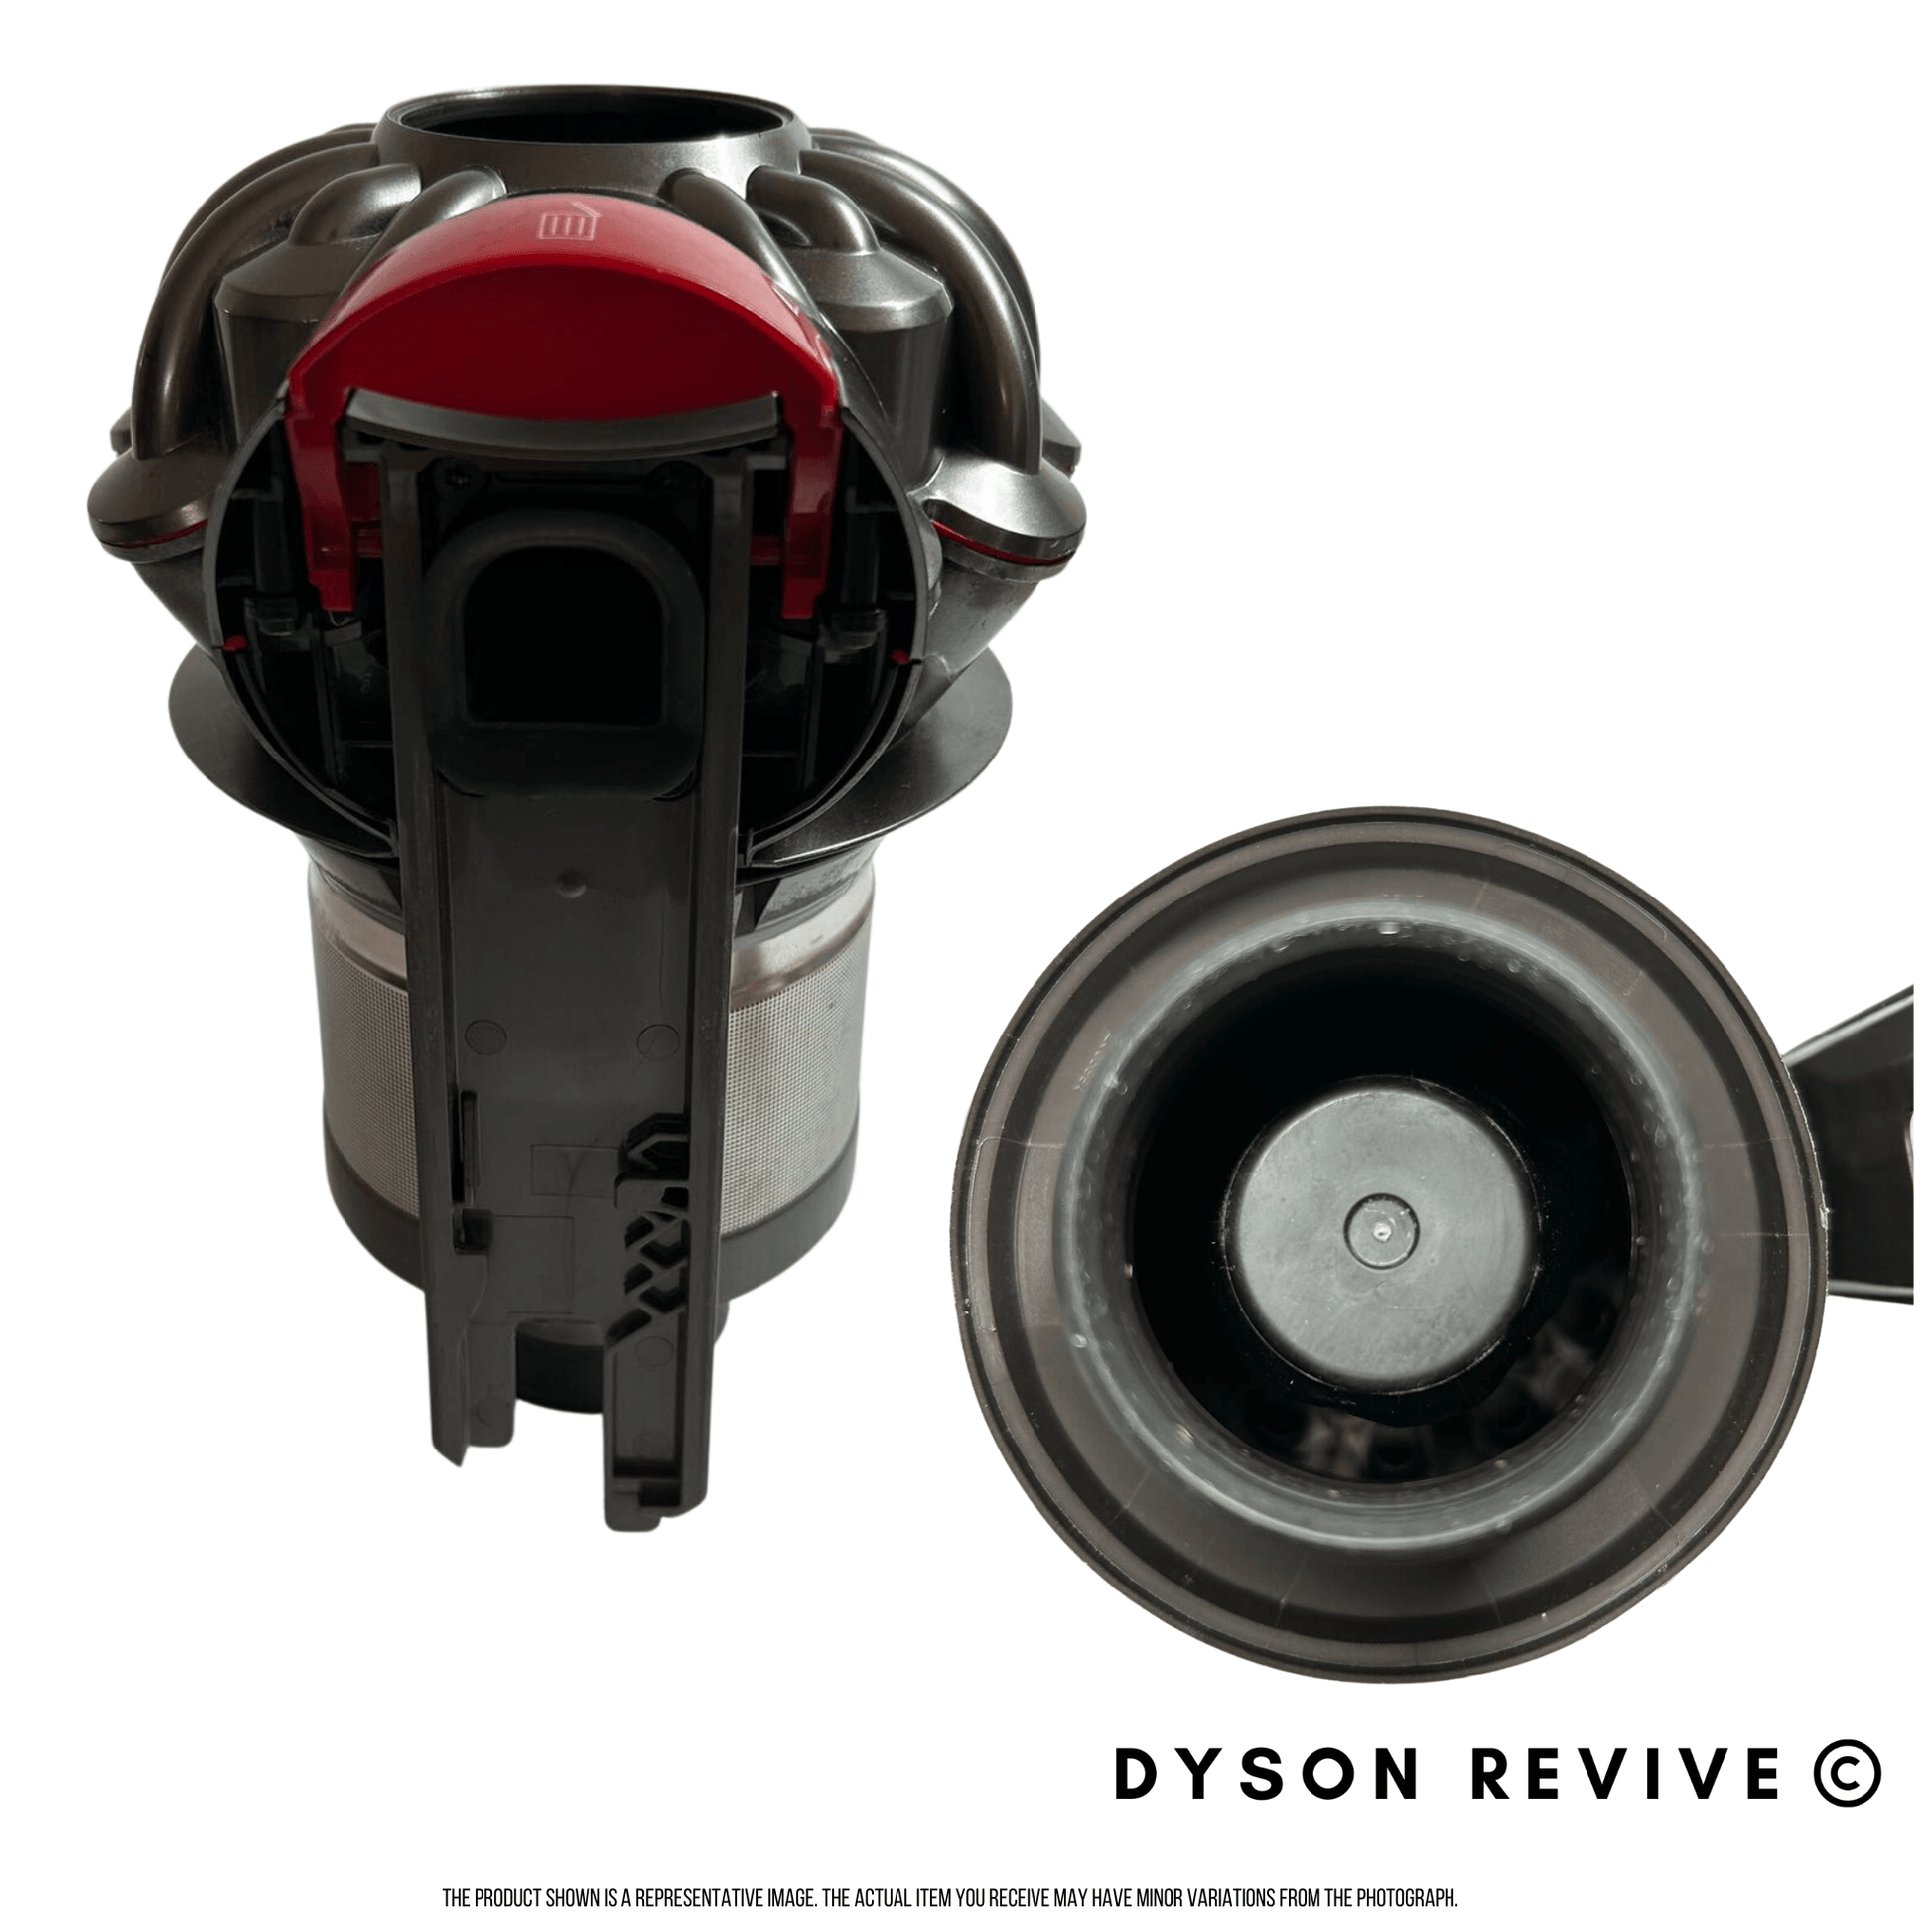 Genuine Refurbished Dyson Cyclone Assemble V7 (SV11) and V8 (SV10) Cordless vacuum - Dyson Revive